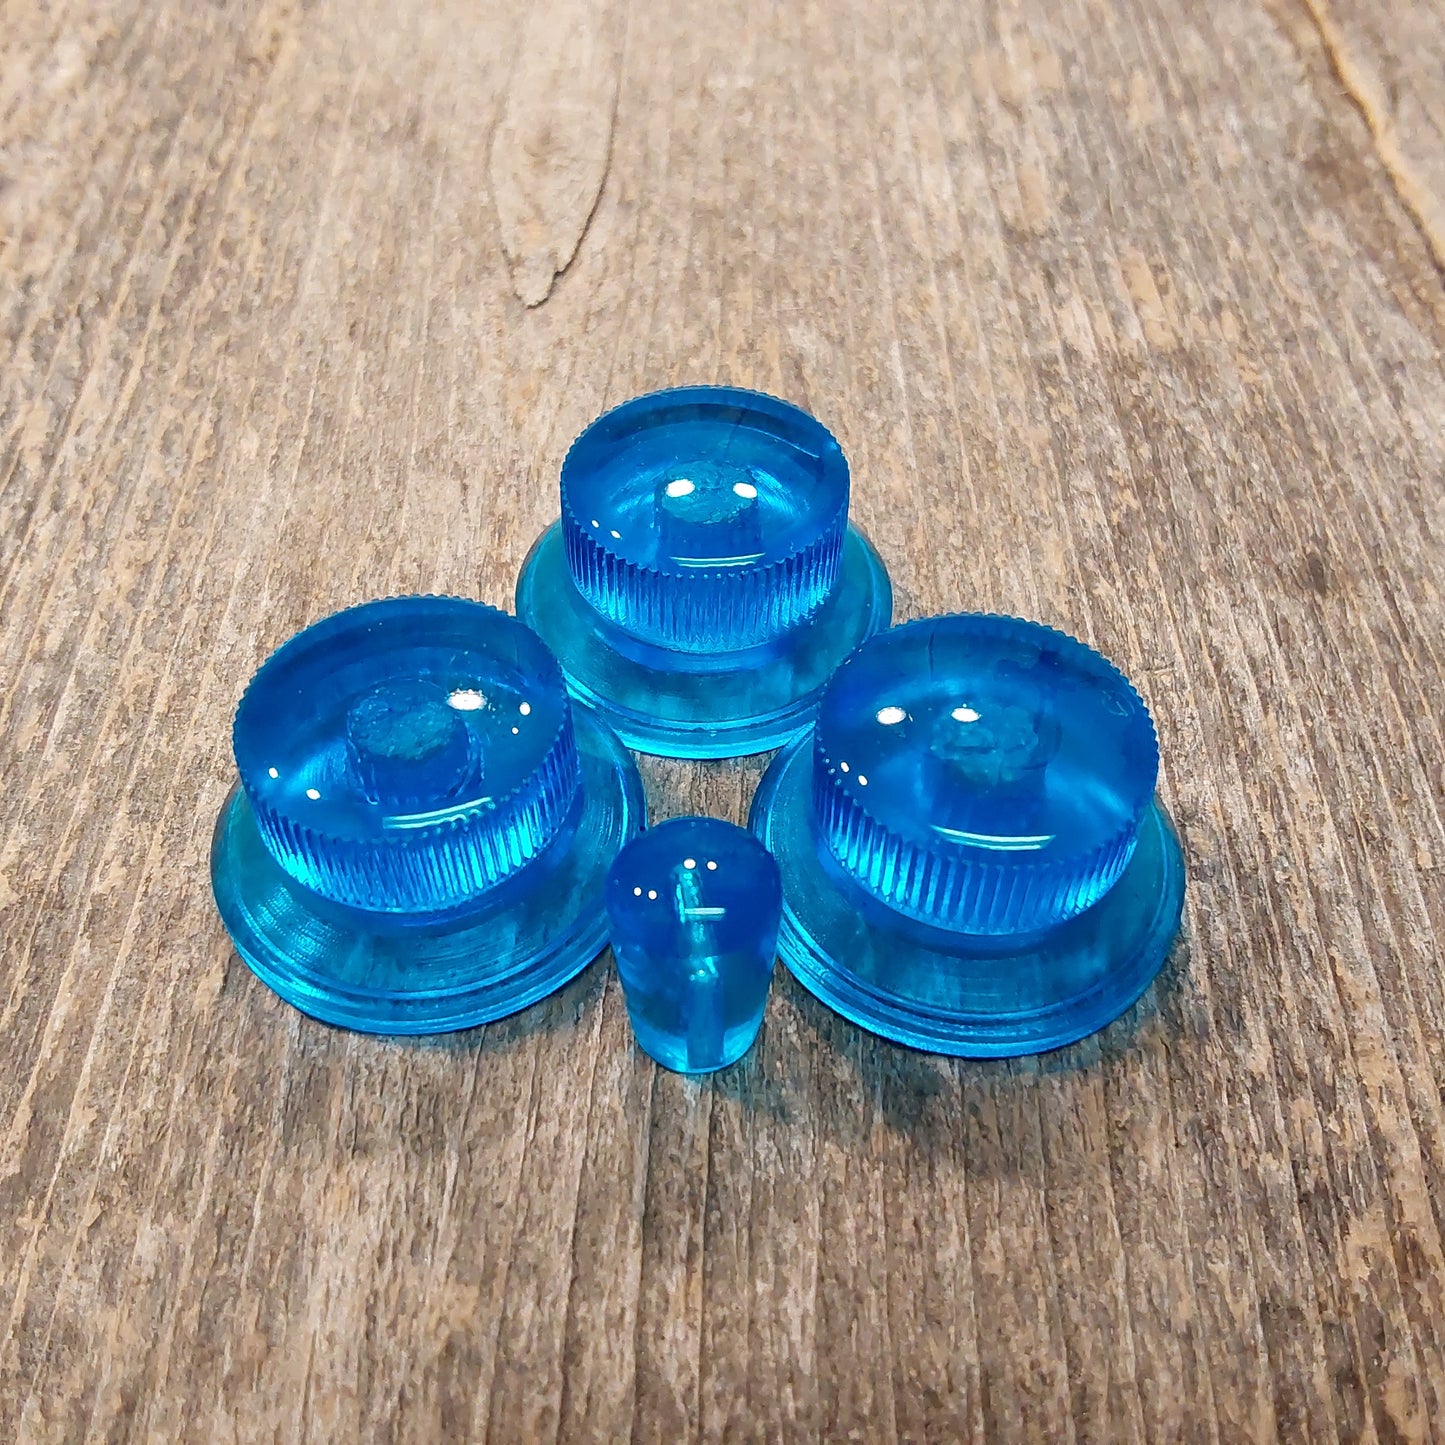 Knobhead PDX - Ice Blue Set of 3 Bell Knobs w/ Blade Switch tip